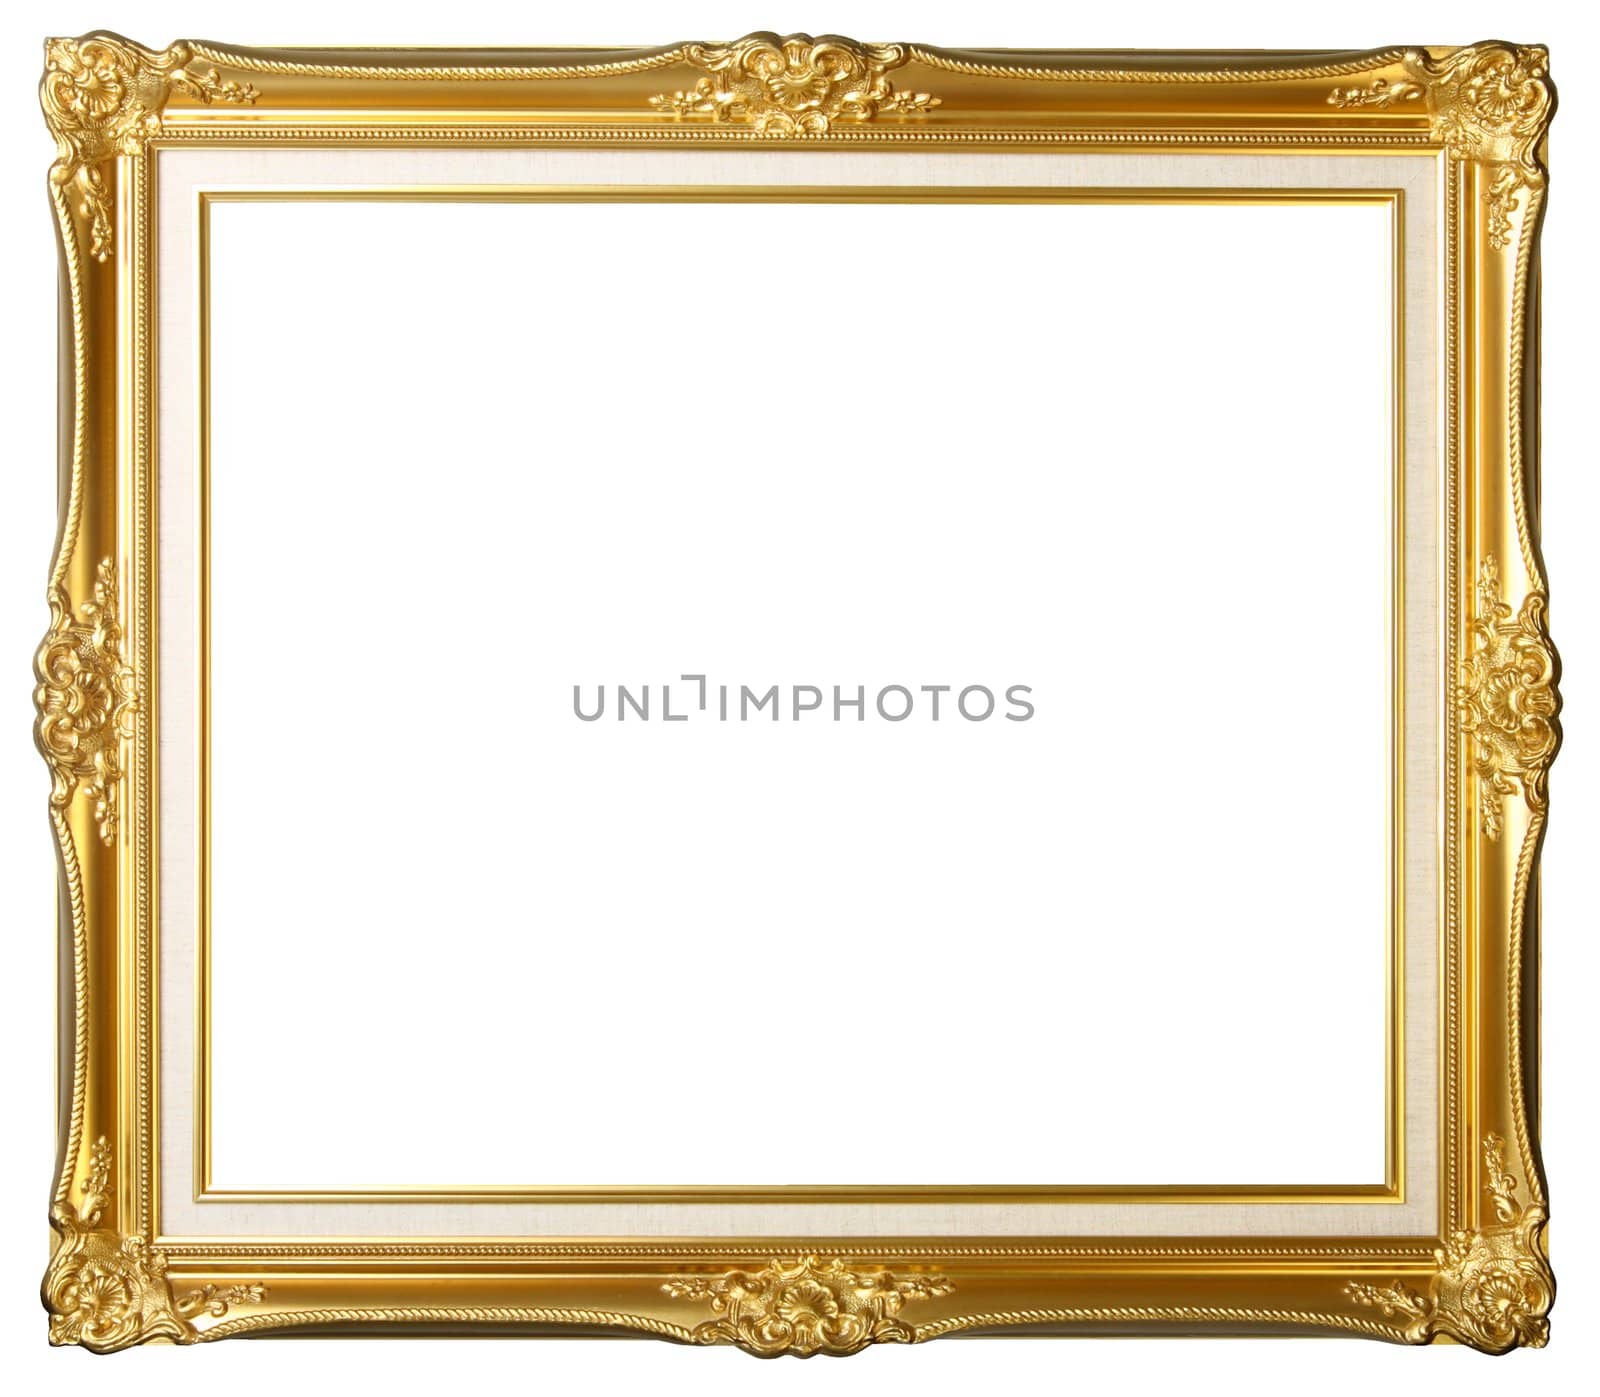 Classic gold picture frame isolated onwhite